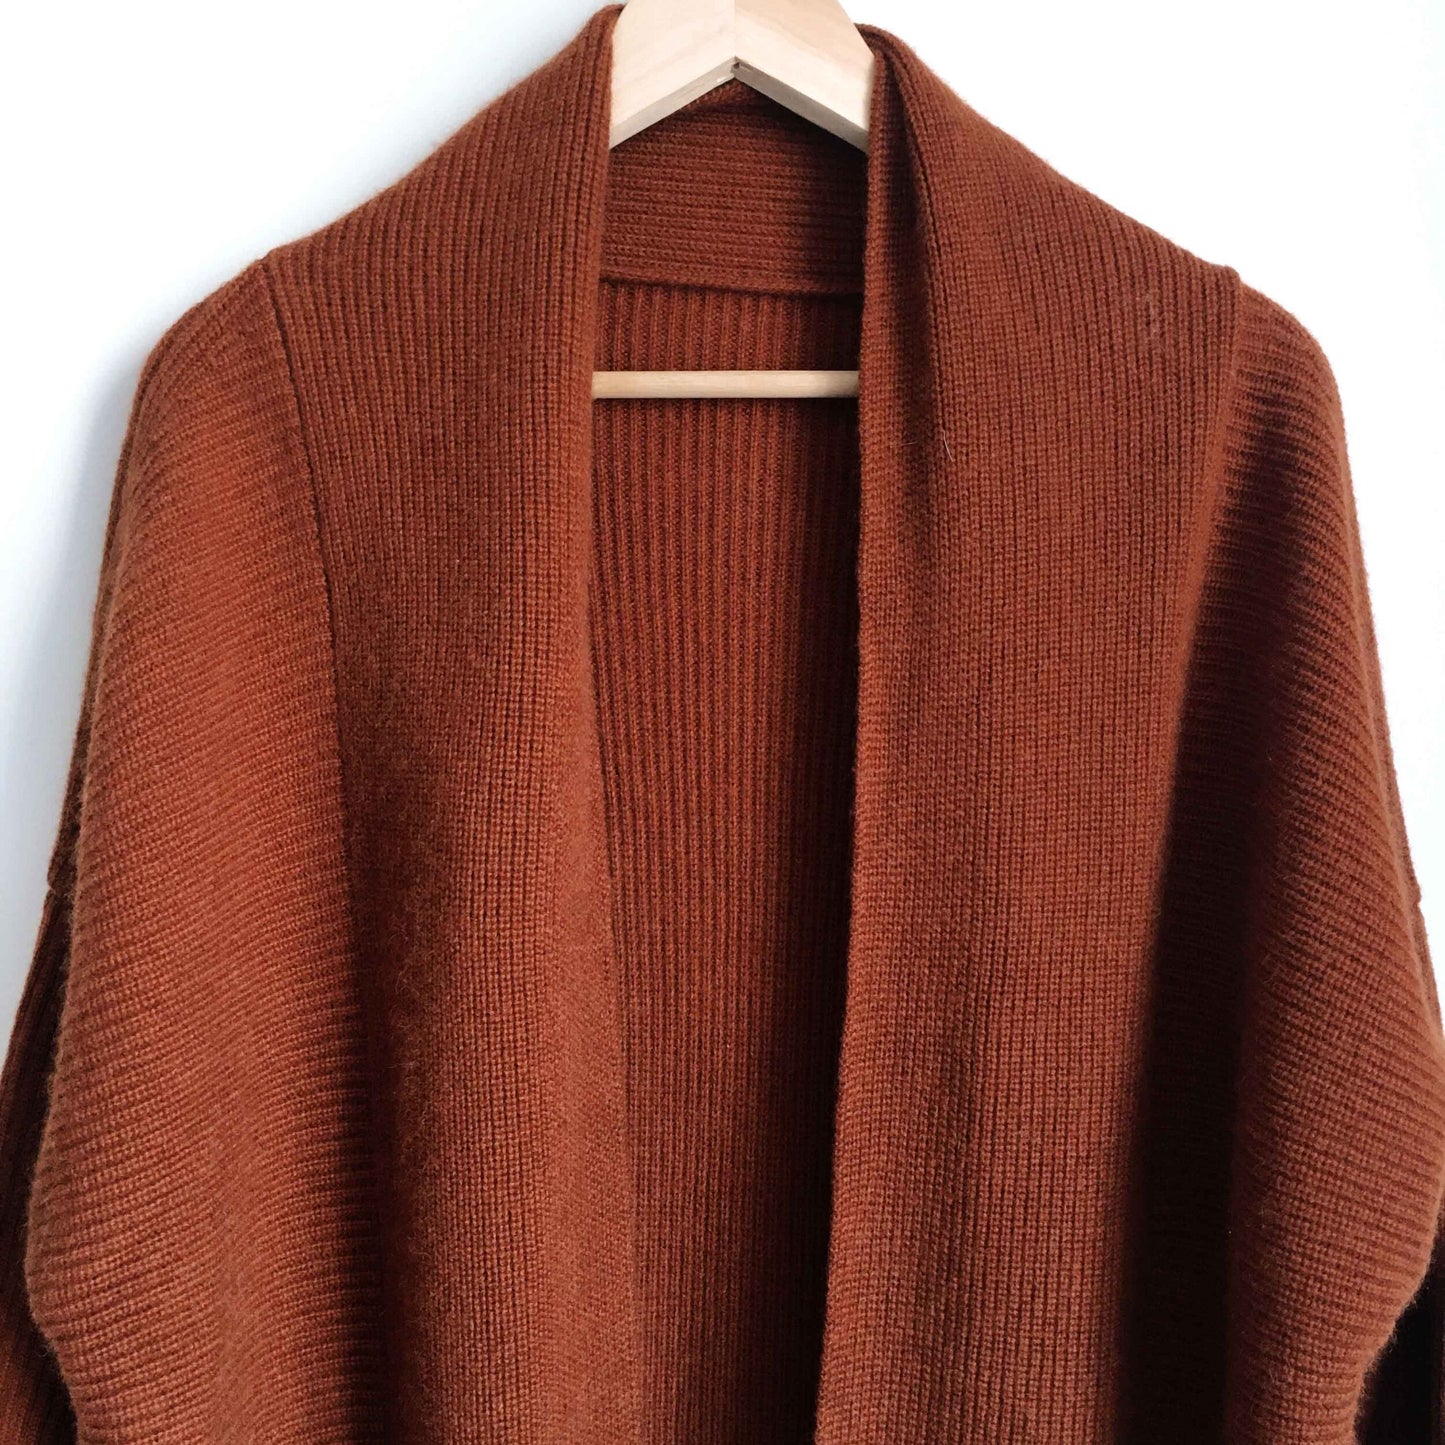 NWT FUMO wool-blend duster cardigan - size Large